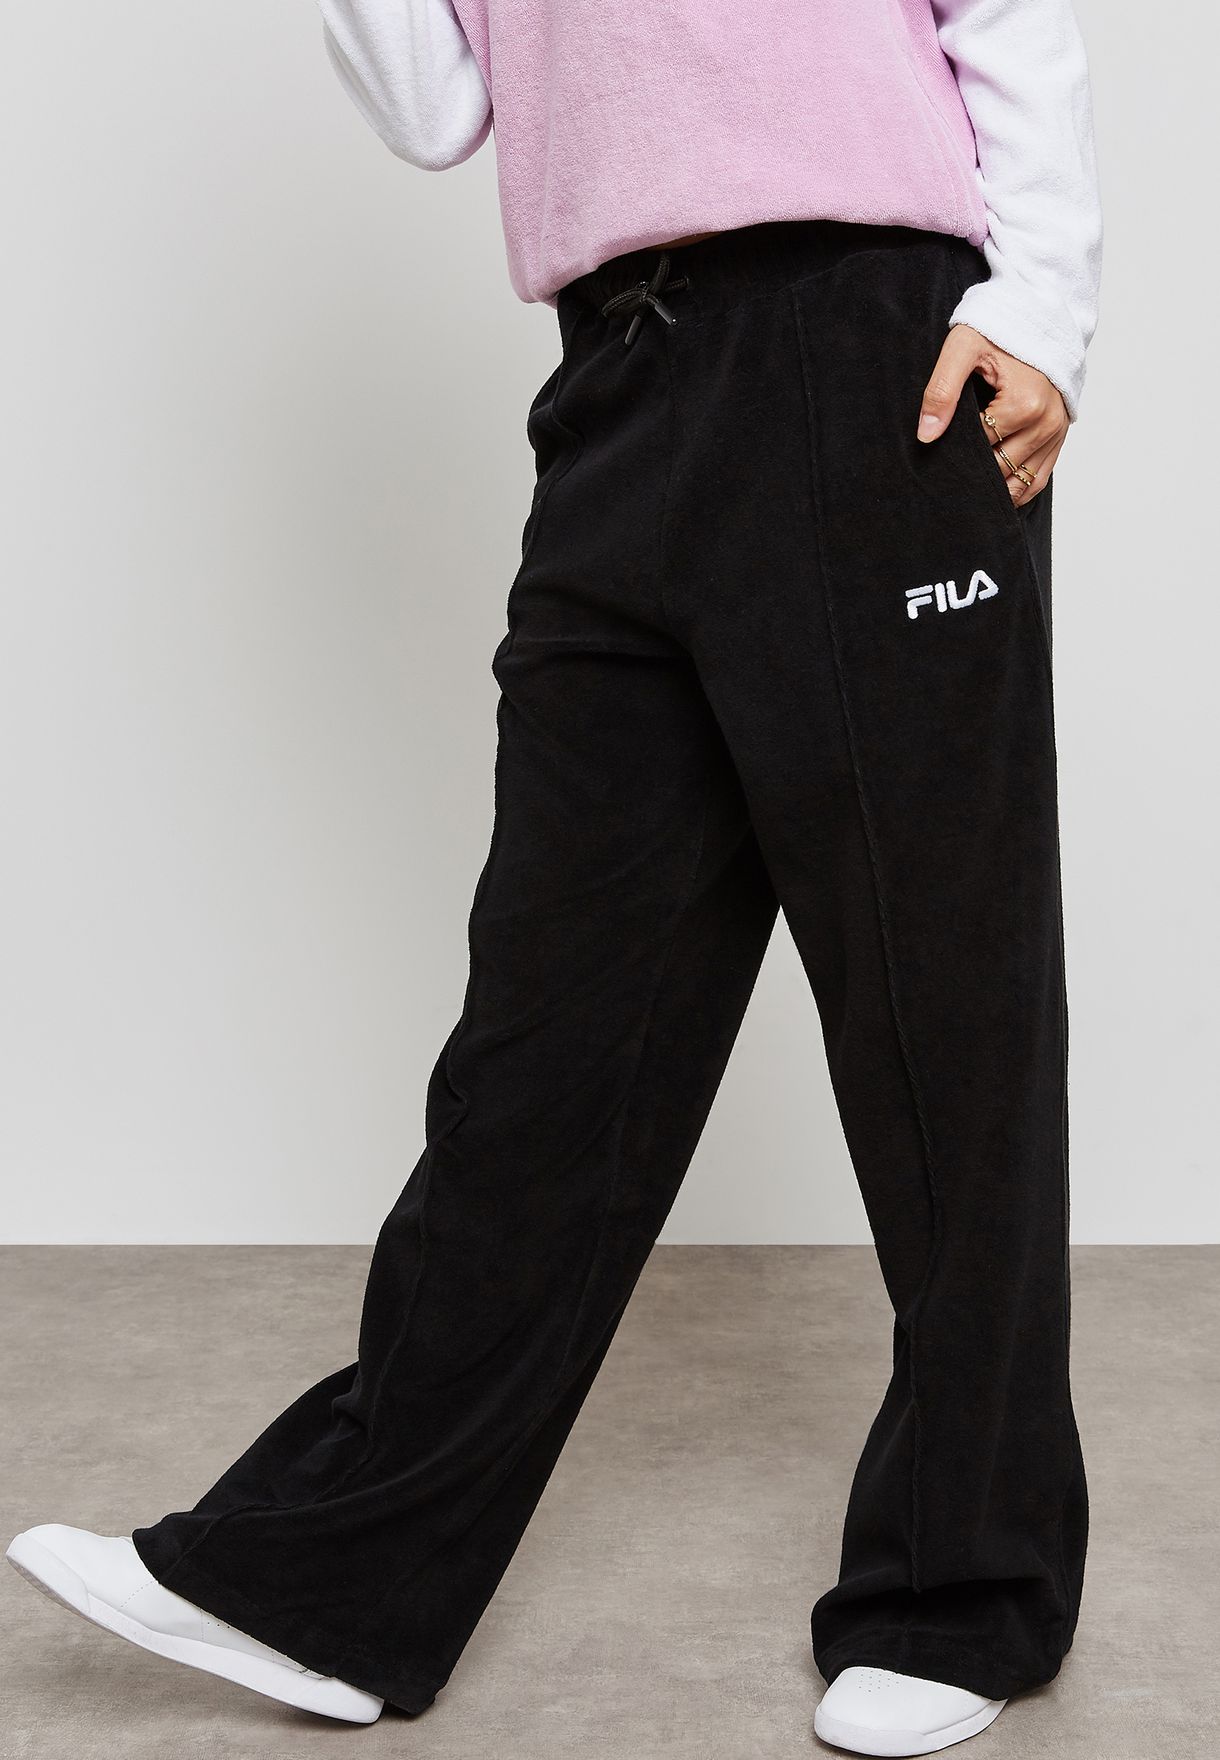 flare sweatpants with pockets